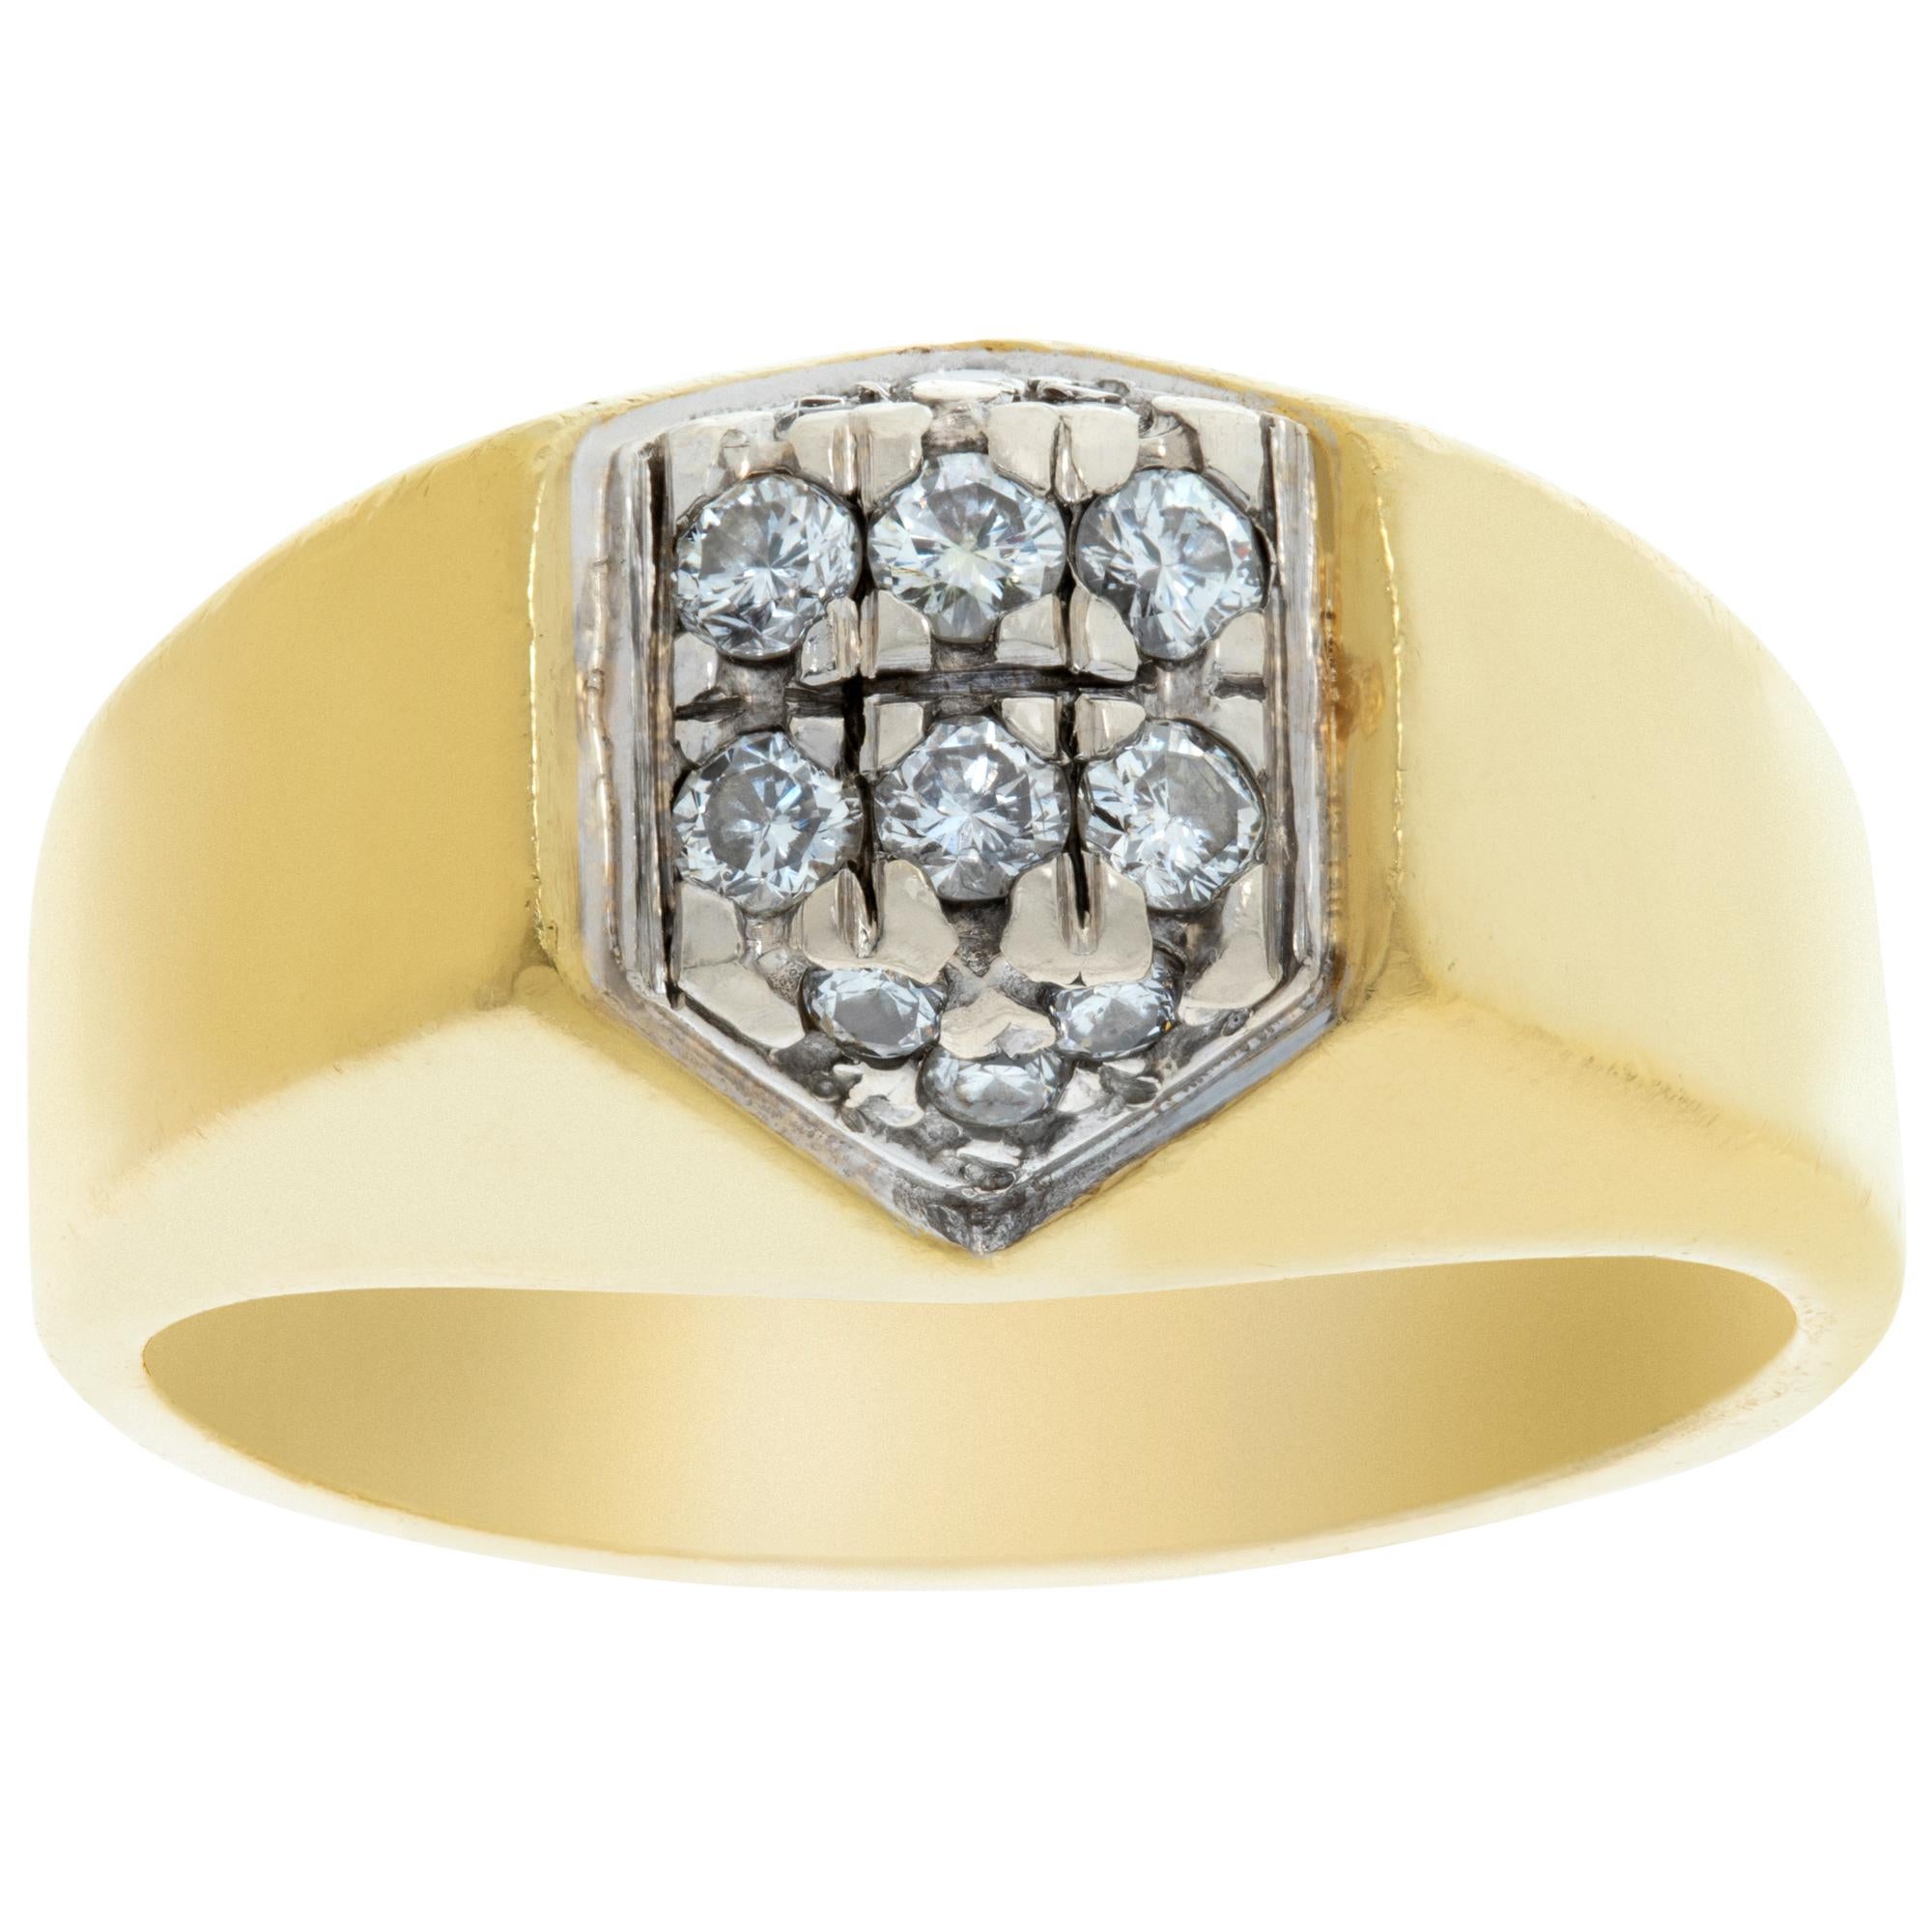 Gents 18k yellow gold diamond ring with approximately 0.18 carat in diamonds. Size 9.This Diamond ring is currently size 9 and some items can be sized up or down, please ask! It weighs 8.9 pennyweights and is 18k.
